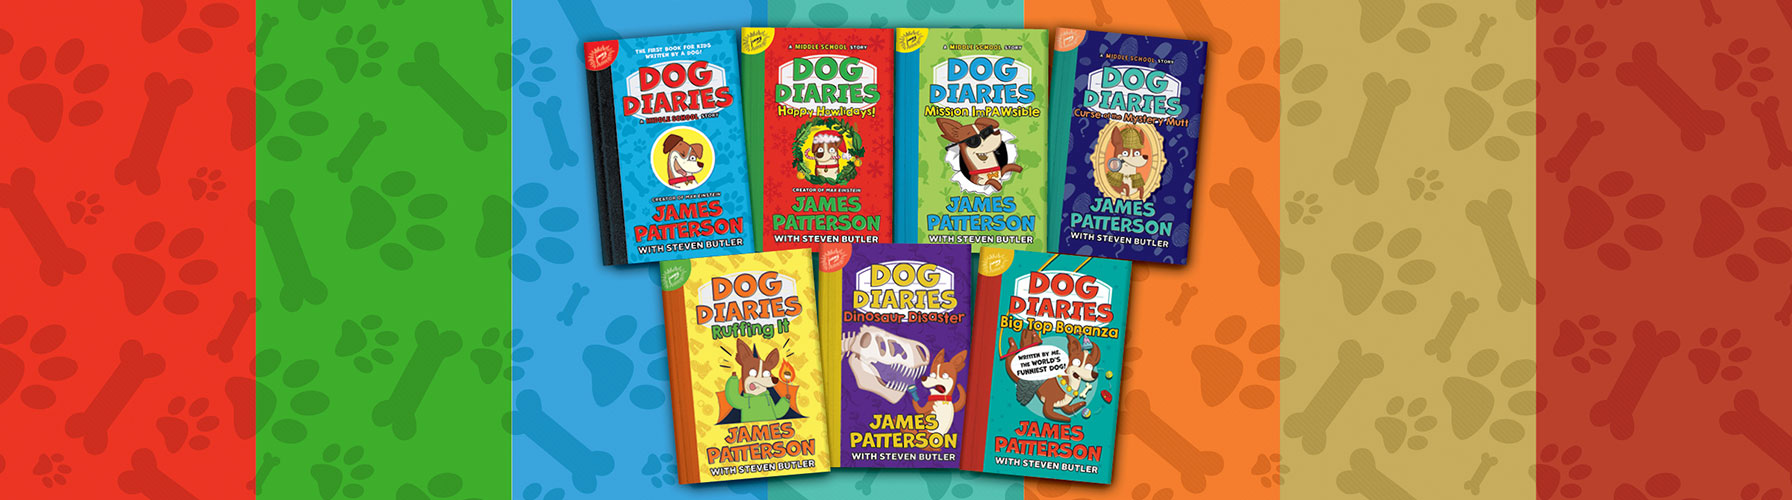 Dog Diaries series collection